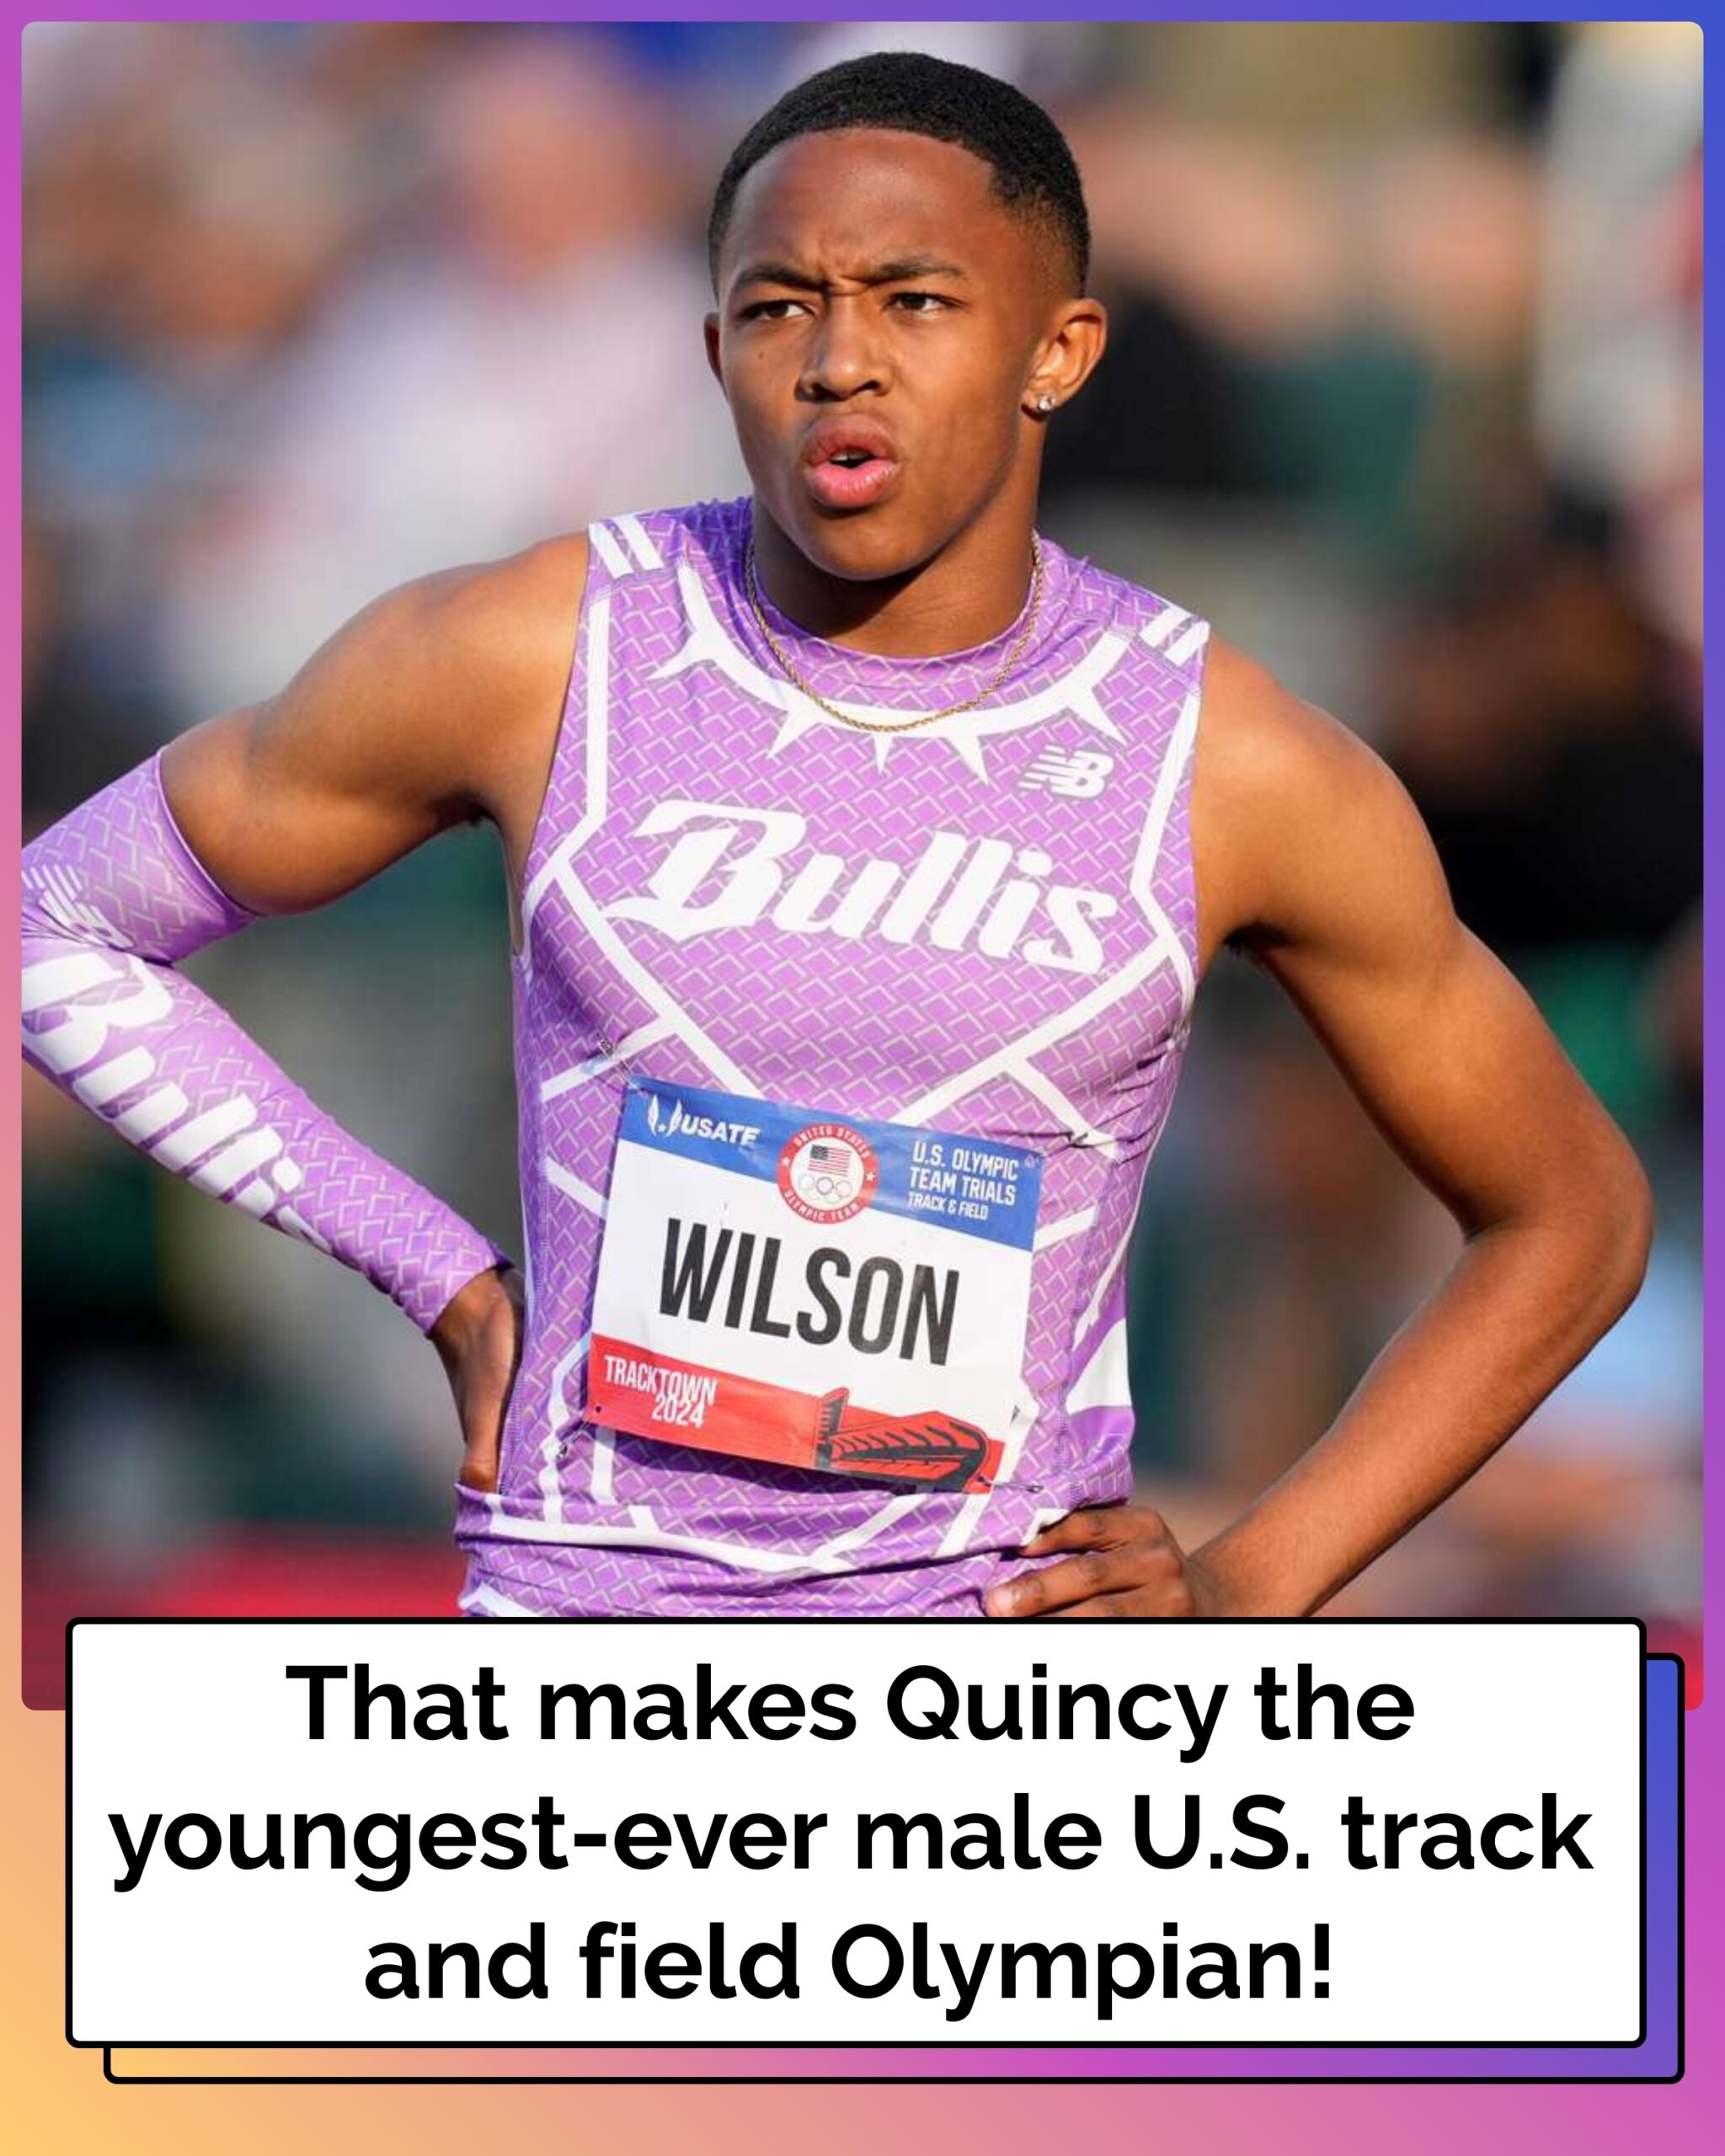 Quincy Wilson, 16, Becomes Youngest-Ever Male U.S. Track Olympian After Being Named to Relay Team